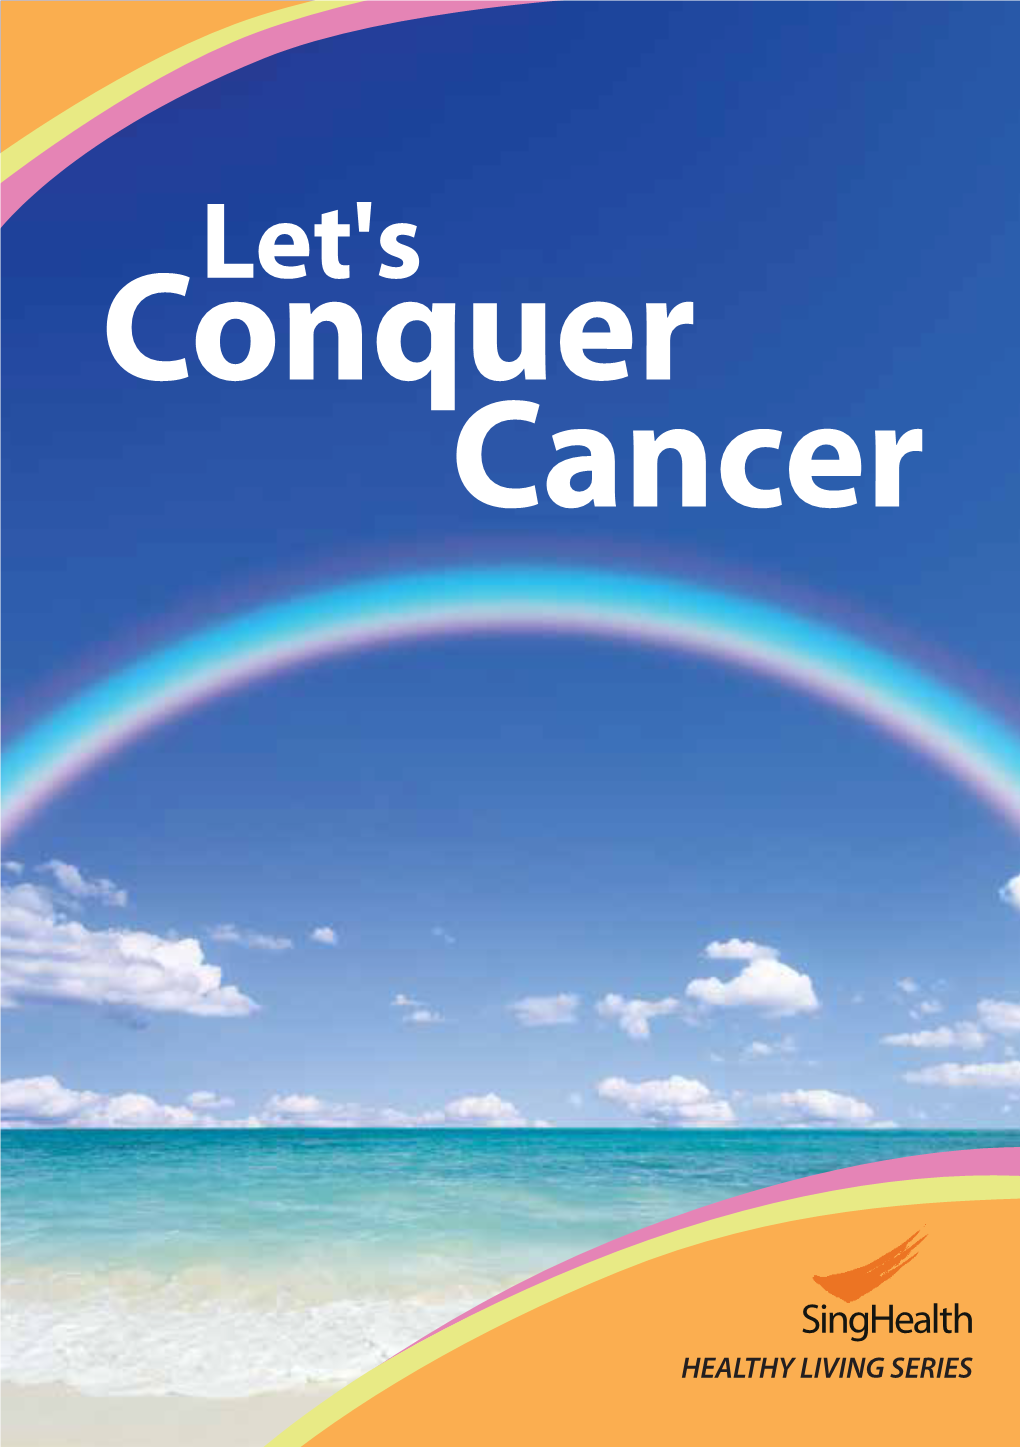 Let's Conquer Cancer Singhealth Healthy Living Series the Singhealth Healthy Living Series of Booklets Aims to Bring Health Information to the Public